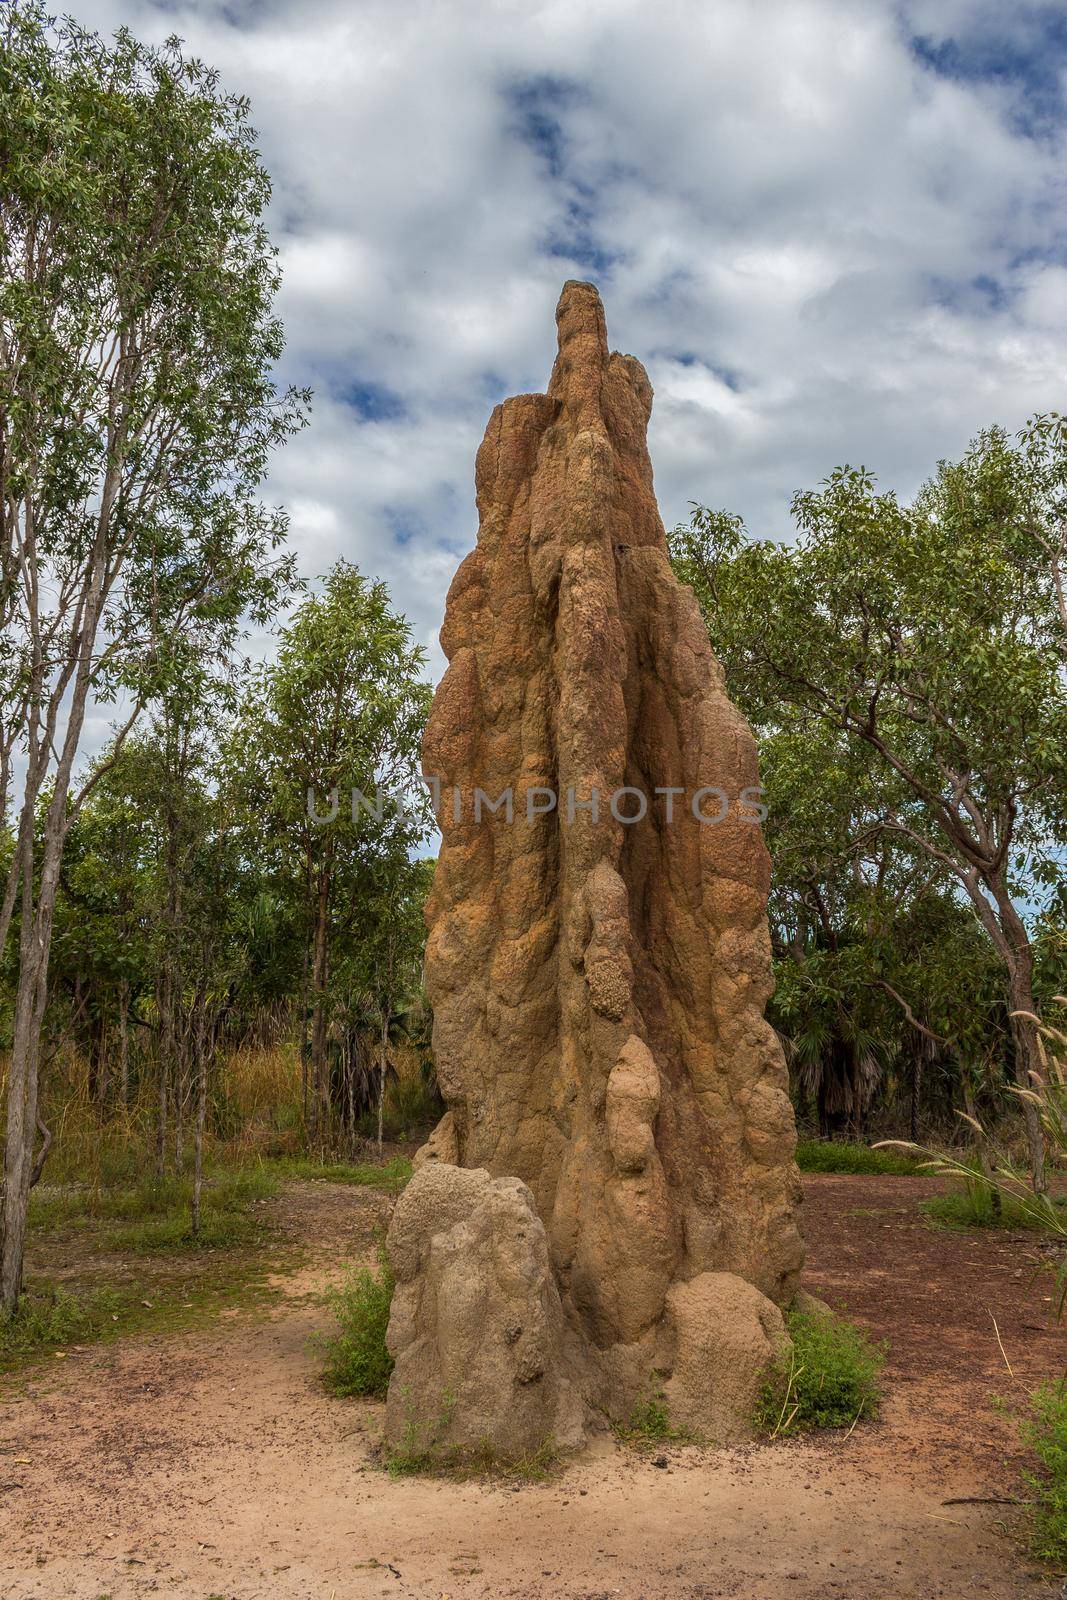 Termite Mound in Litchfield National Park, Northern Territory